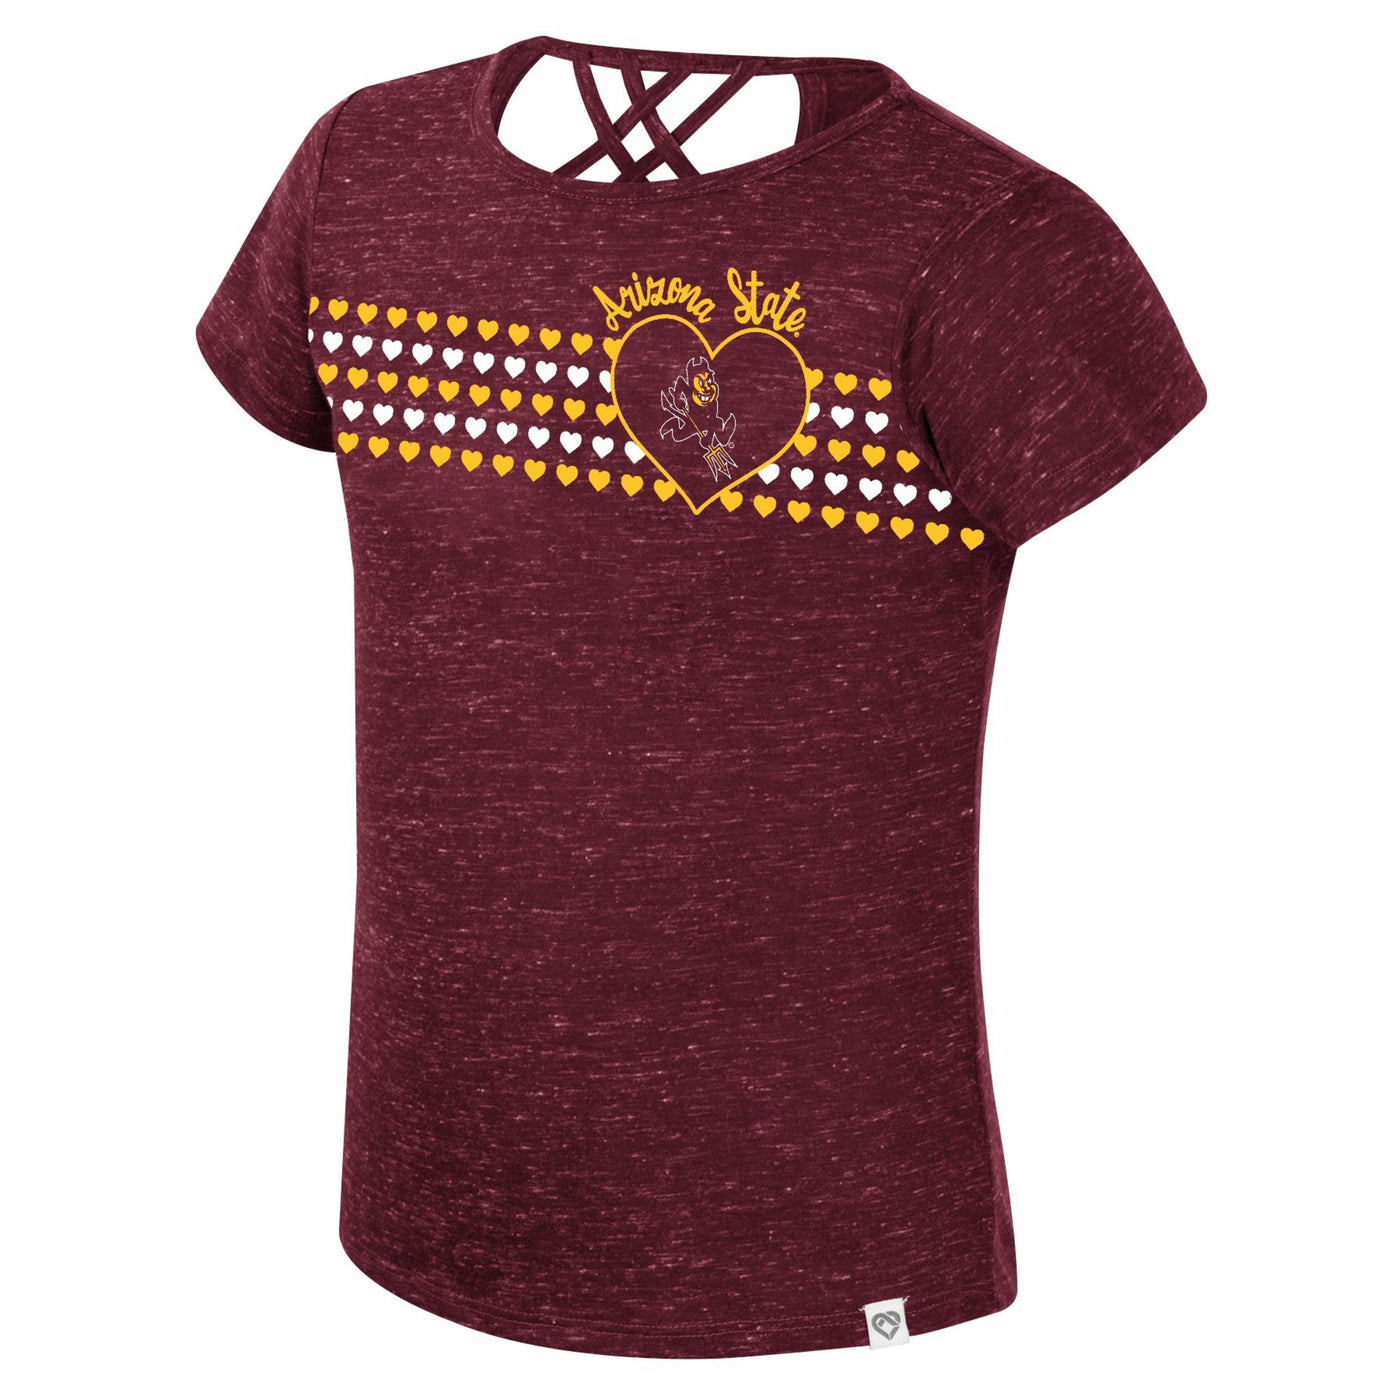 ASU youth girls maroon t-shirt with 5 stripes of small hearts alternating between gold and white. A heart outline with the sparky mascot inside and above is the cursive gold text 